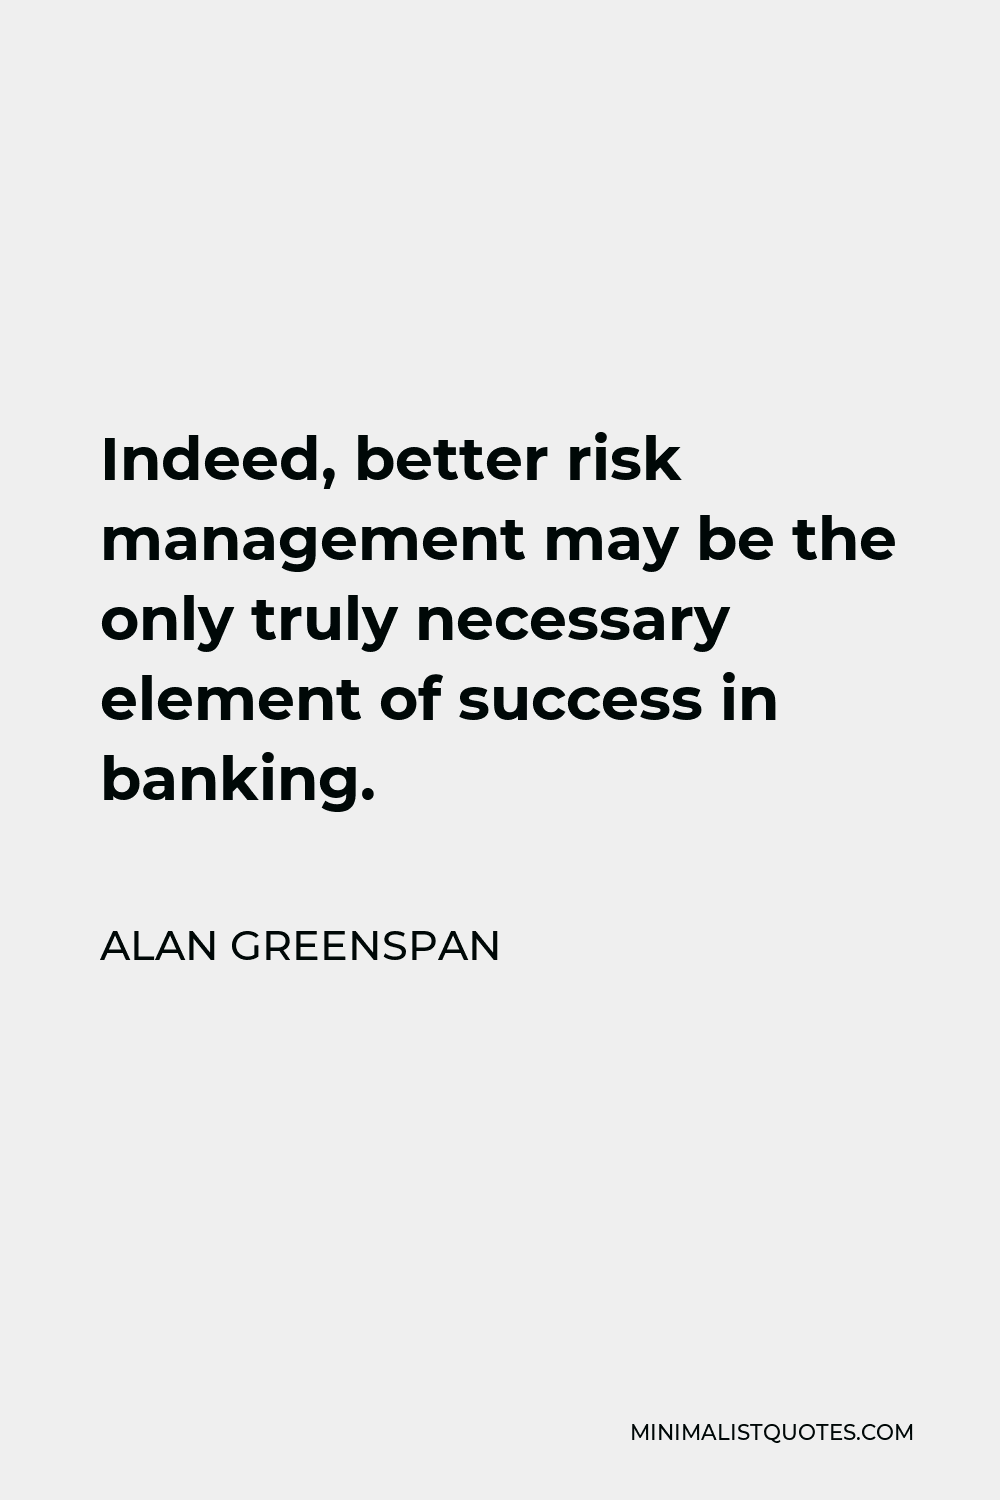 Alan Greenspan Quote - Indeed, better risk management may be the only truly necessary element of success in banking.